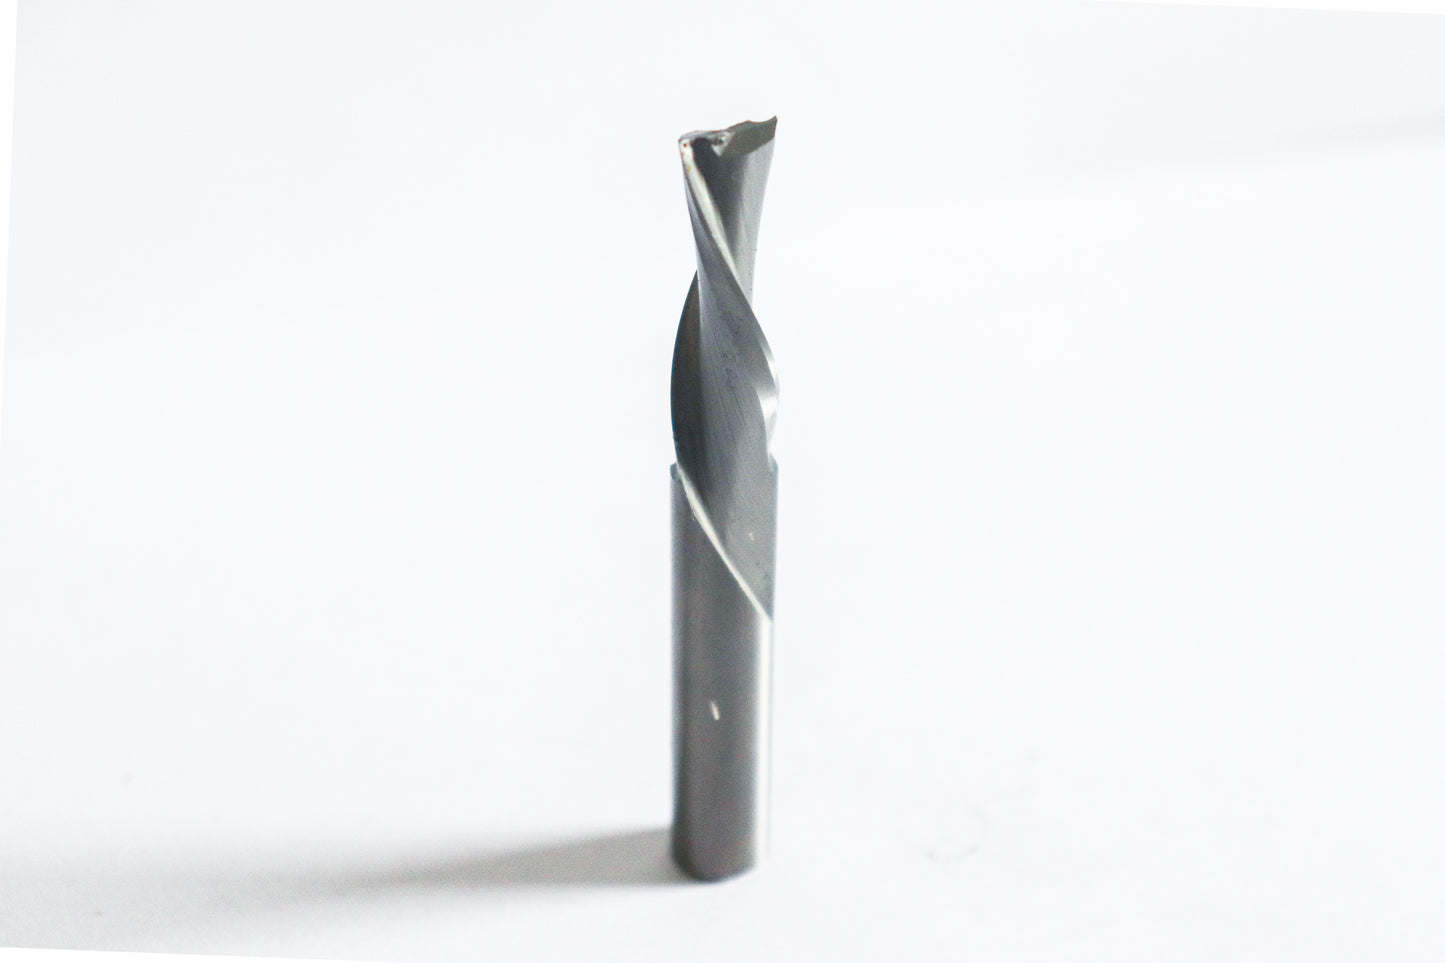 045-1640RX: 2FL Sprial Upcut; 1/2"SH; 1/2"CD; 1-1/4"CL; The RX series of bits last 50% longer than other premium CNC bits.